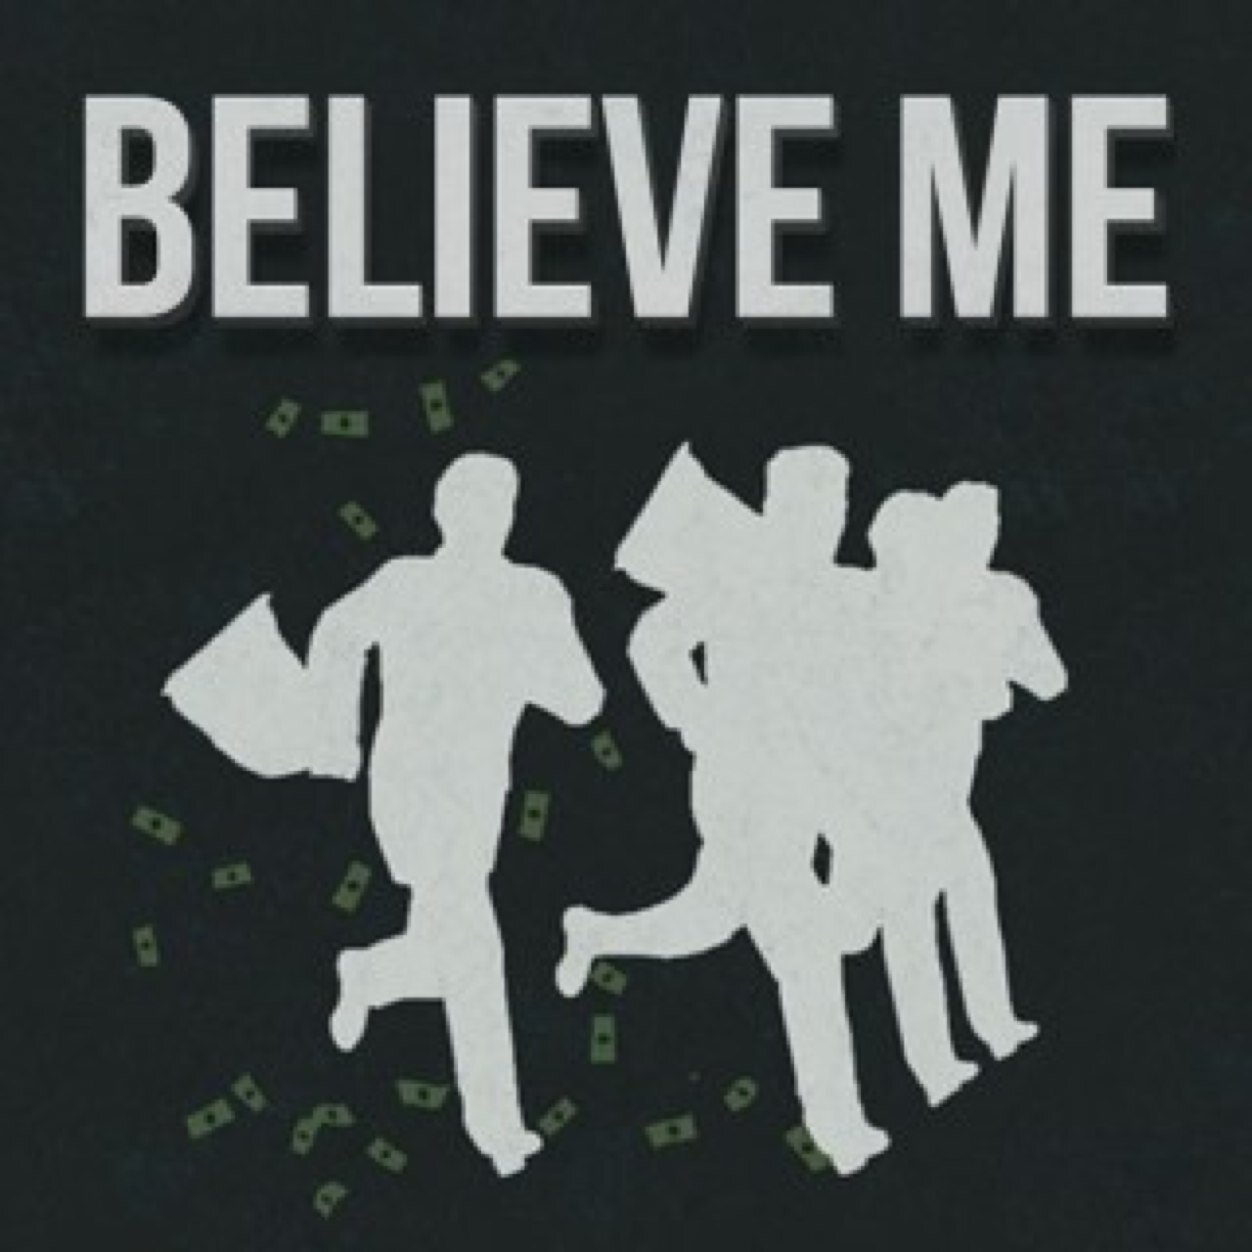 *This account is no way affiliated with the actual movie BELIEVE ME. For official updates follow @believemefilm